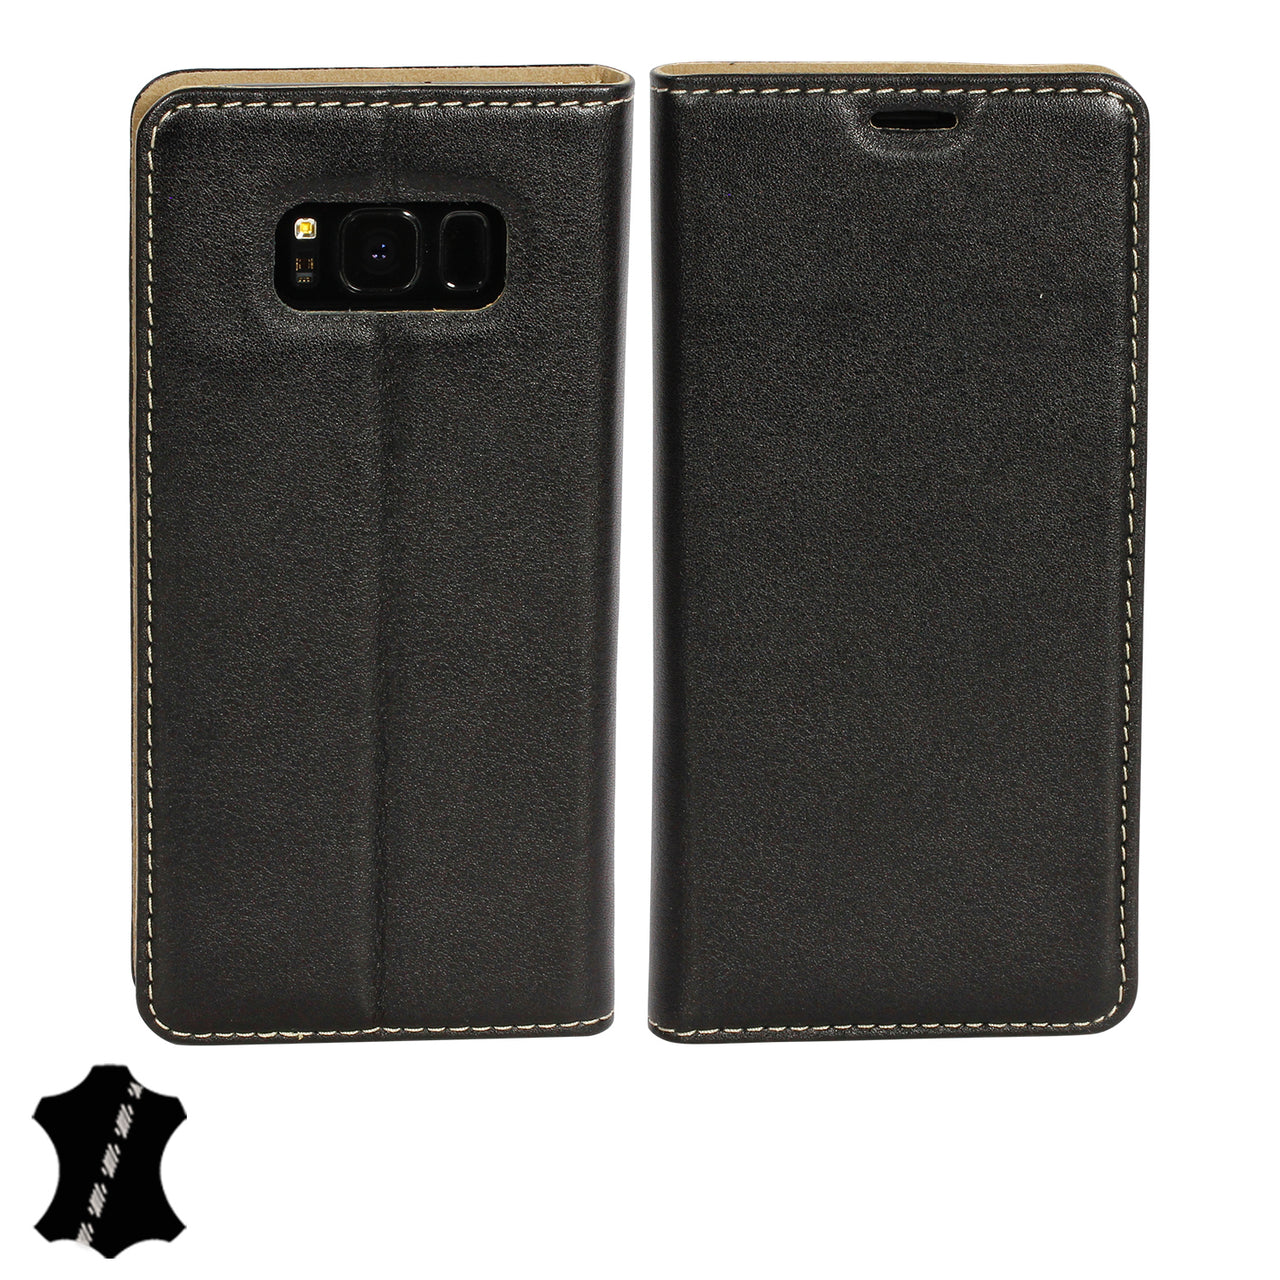 Samsung Galaxy S9 Plus (S9+) Genuine Leather Case with Stand | Artisancover